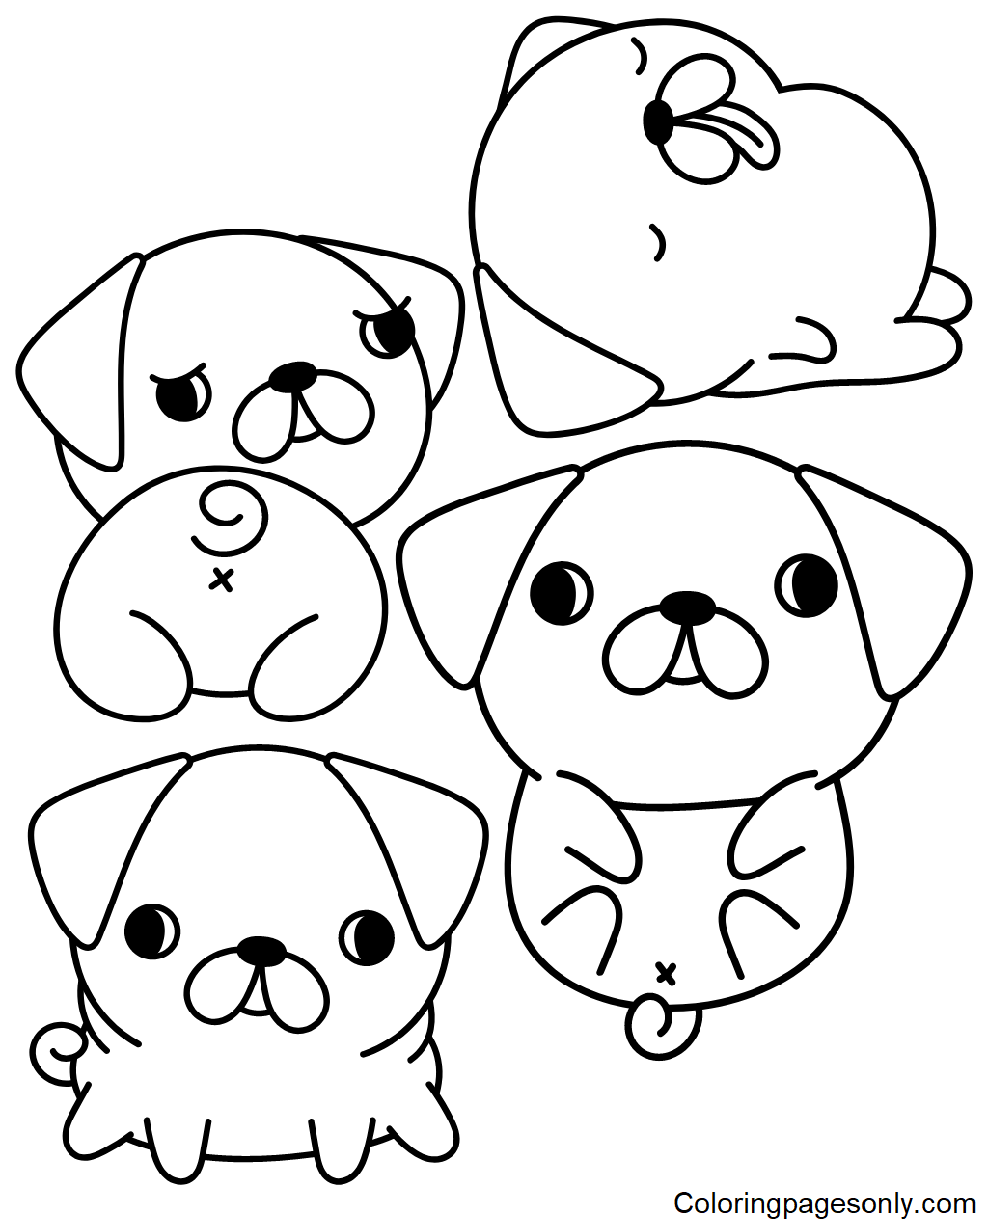 Kawaii Pug Sticker Coloring Pages